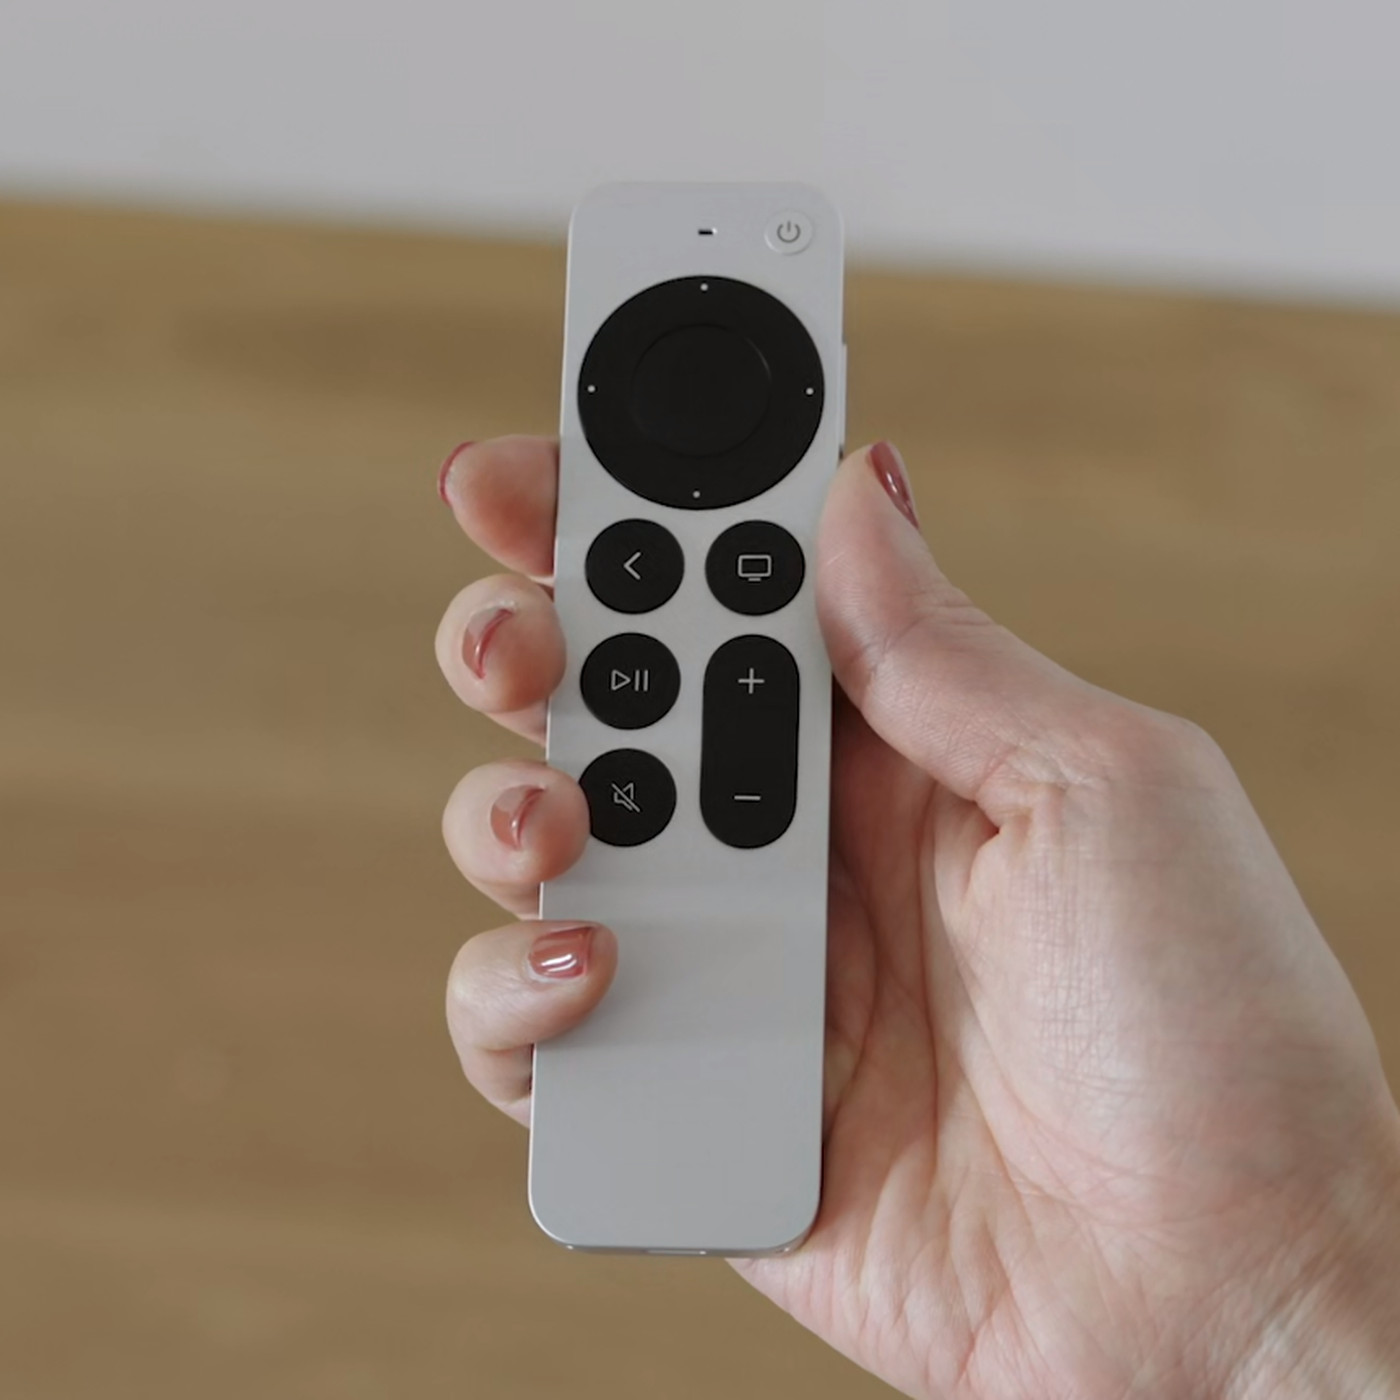 Apple's new $60 Siri remote can be used with Apple TVs - The Verge